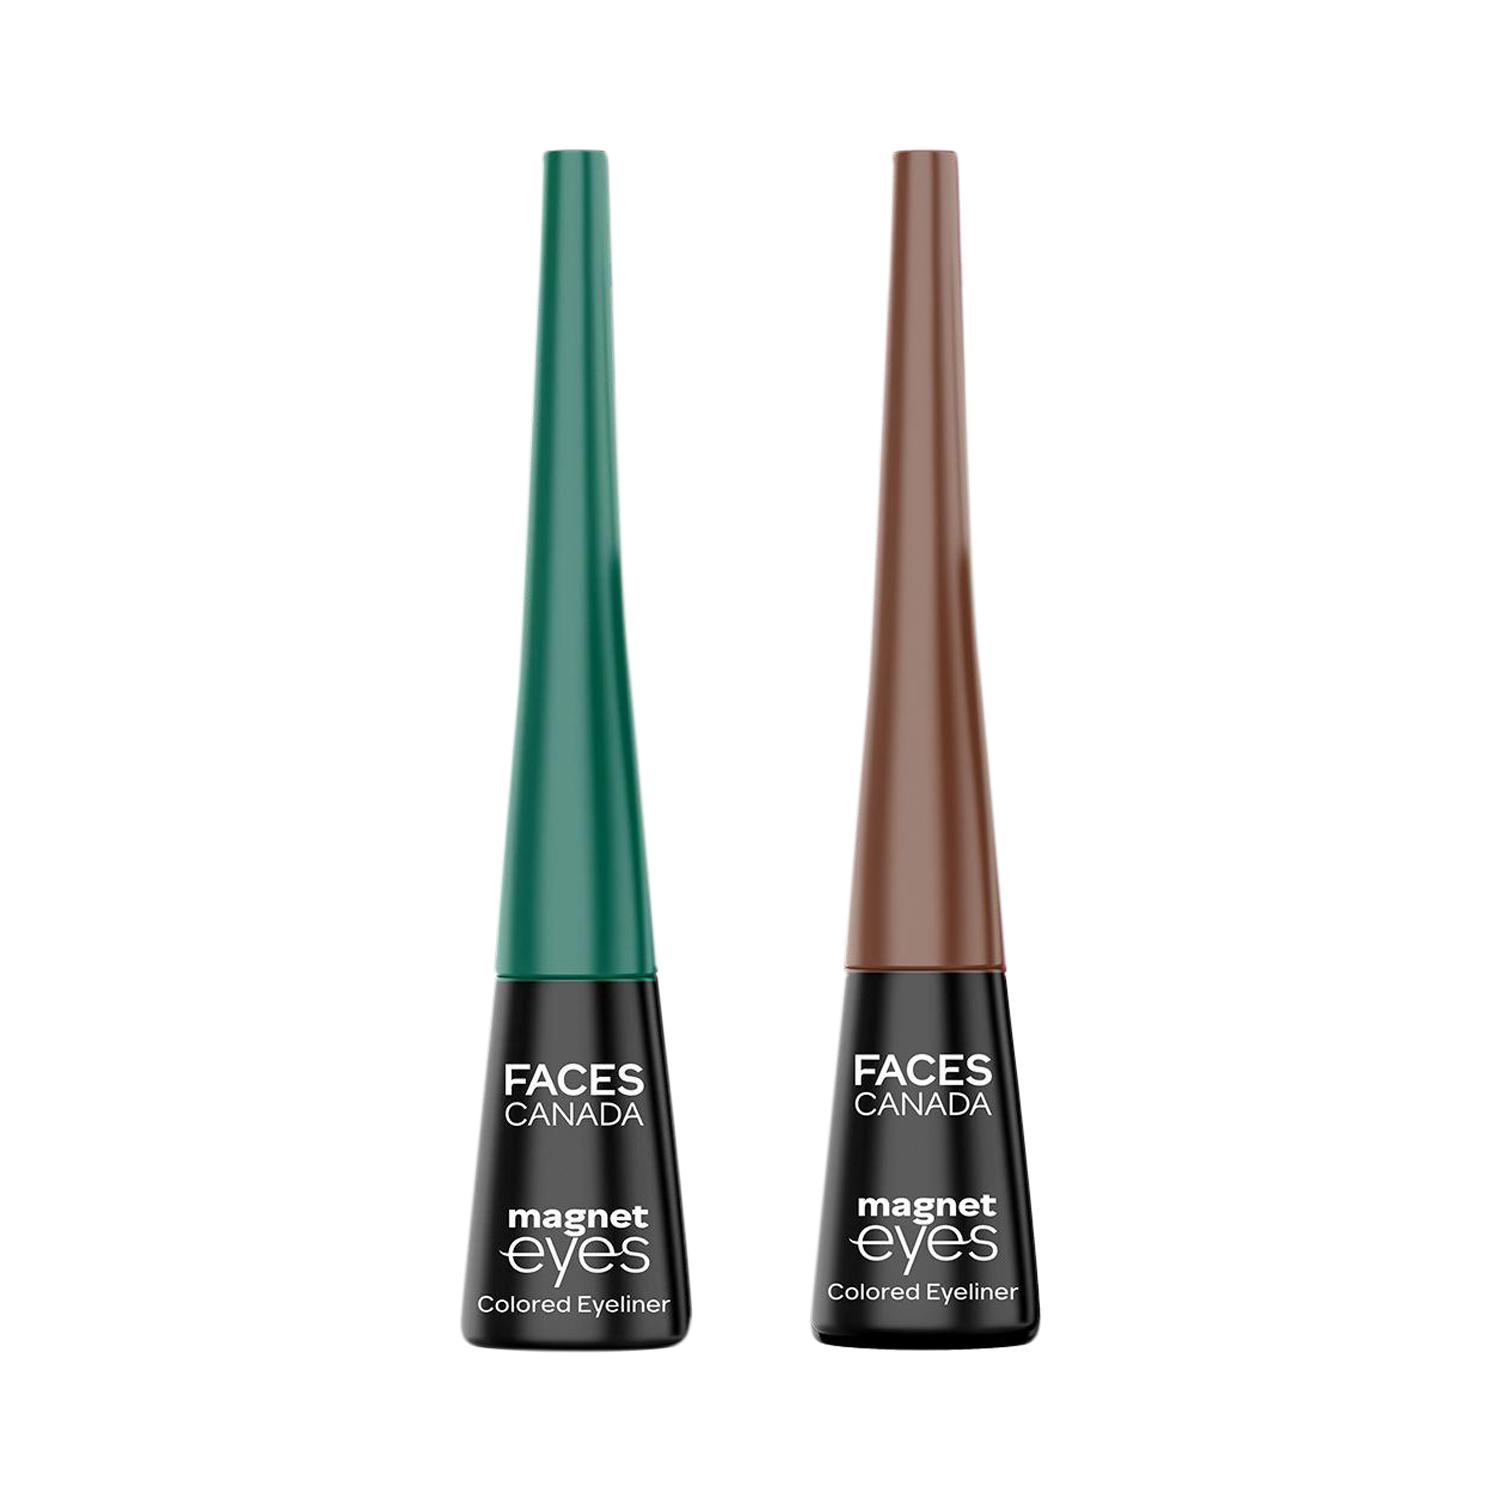 Faces Canada | Faces Canada Magneteyes Color Eyeliners Combo - Elegant Green and Powerful Brown (Pack of 2)